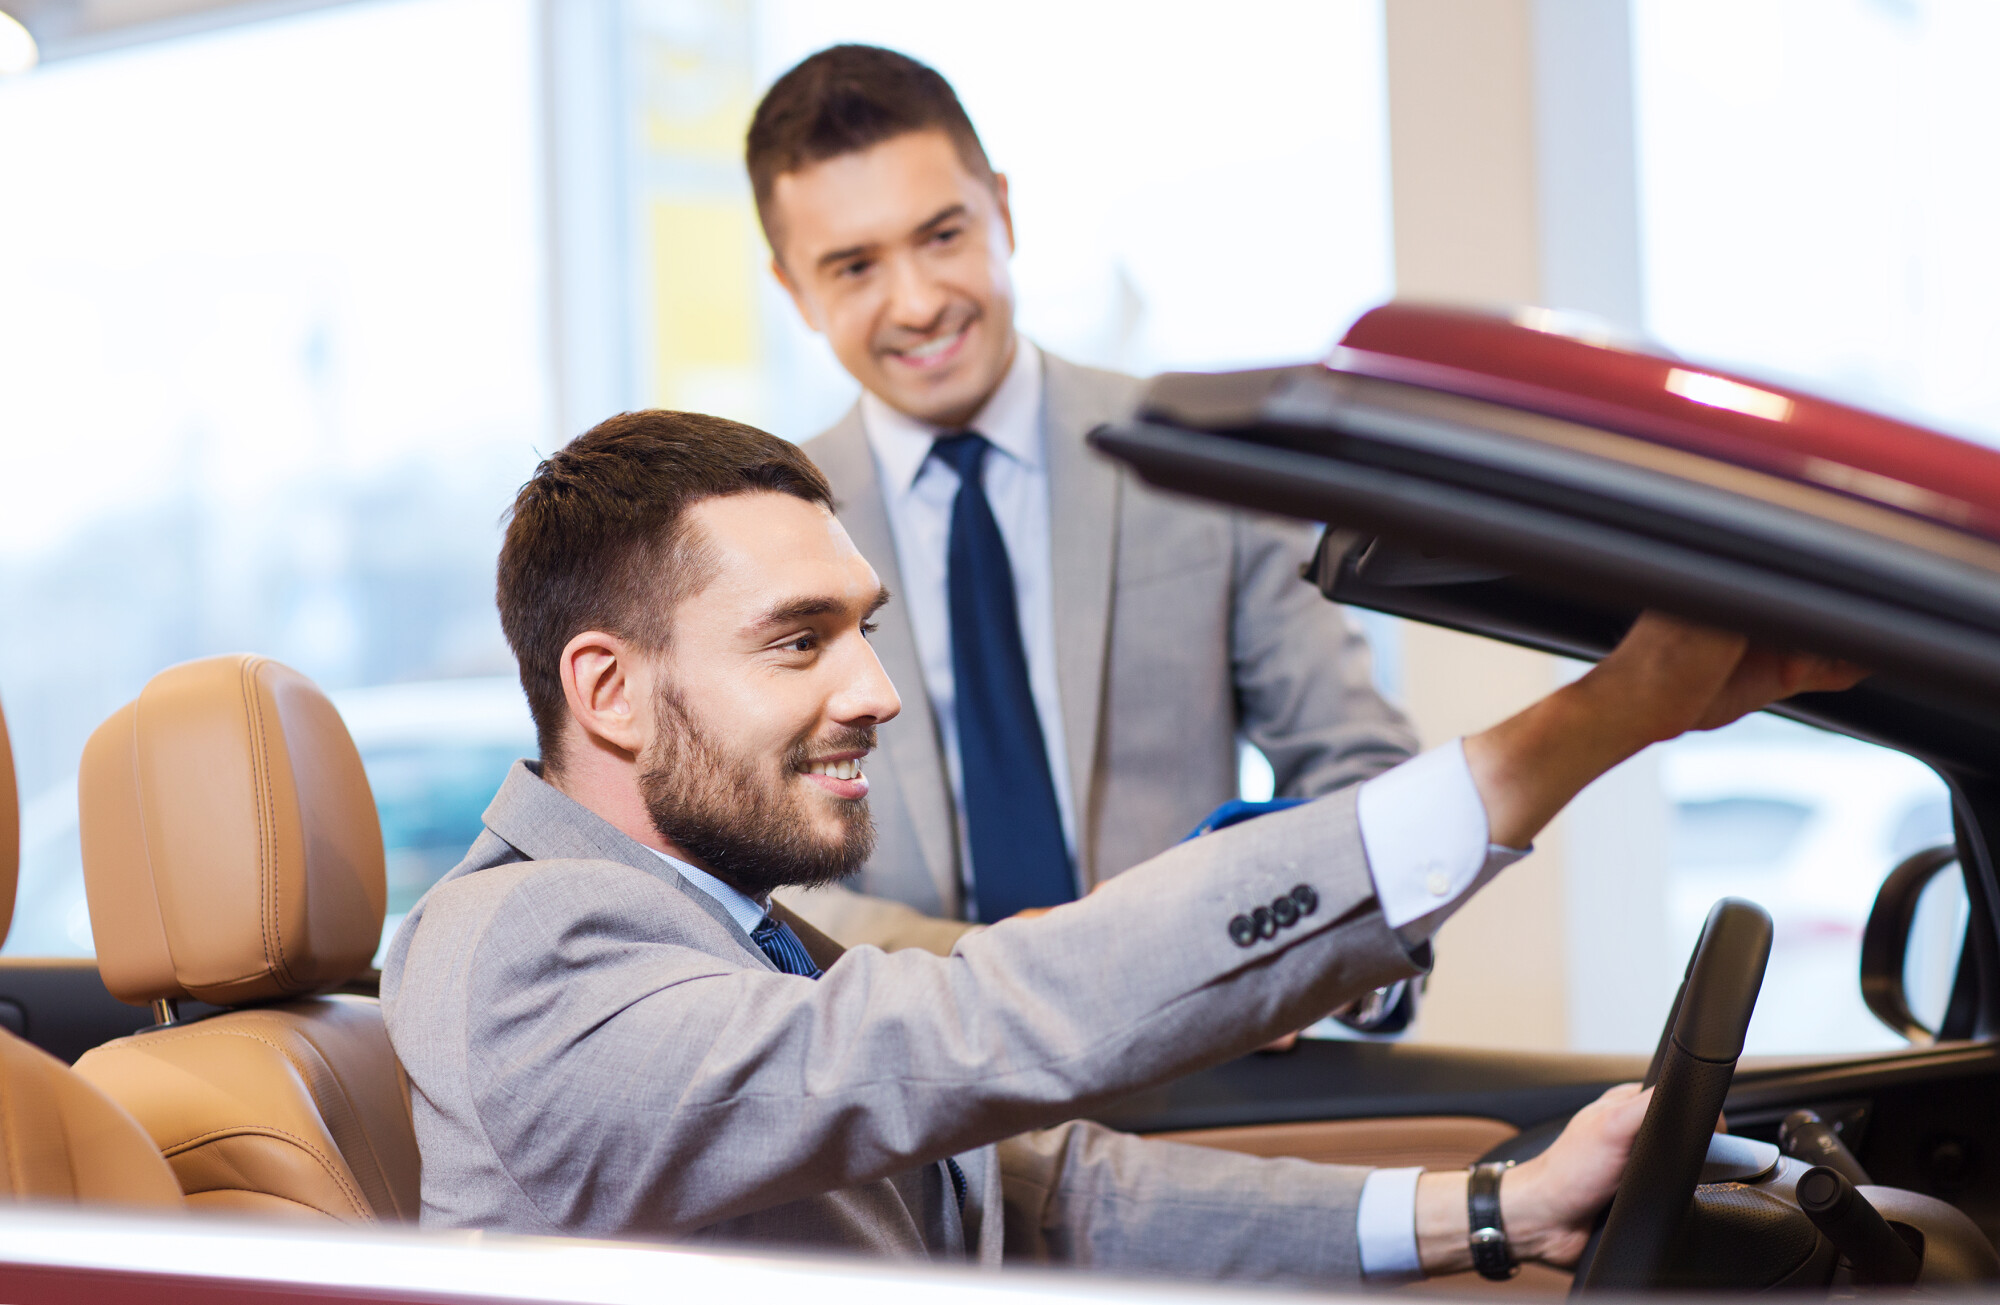 13 Important Tips for First-Time Car Buyers